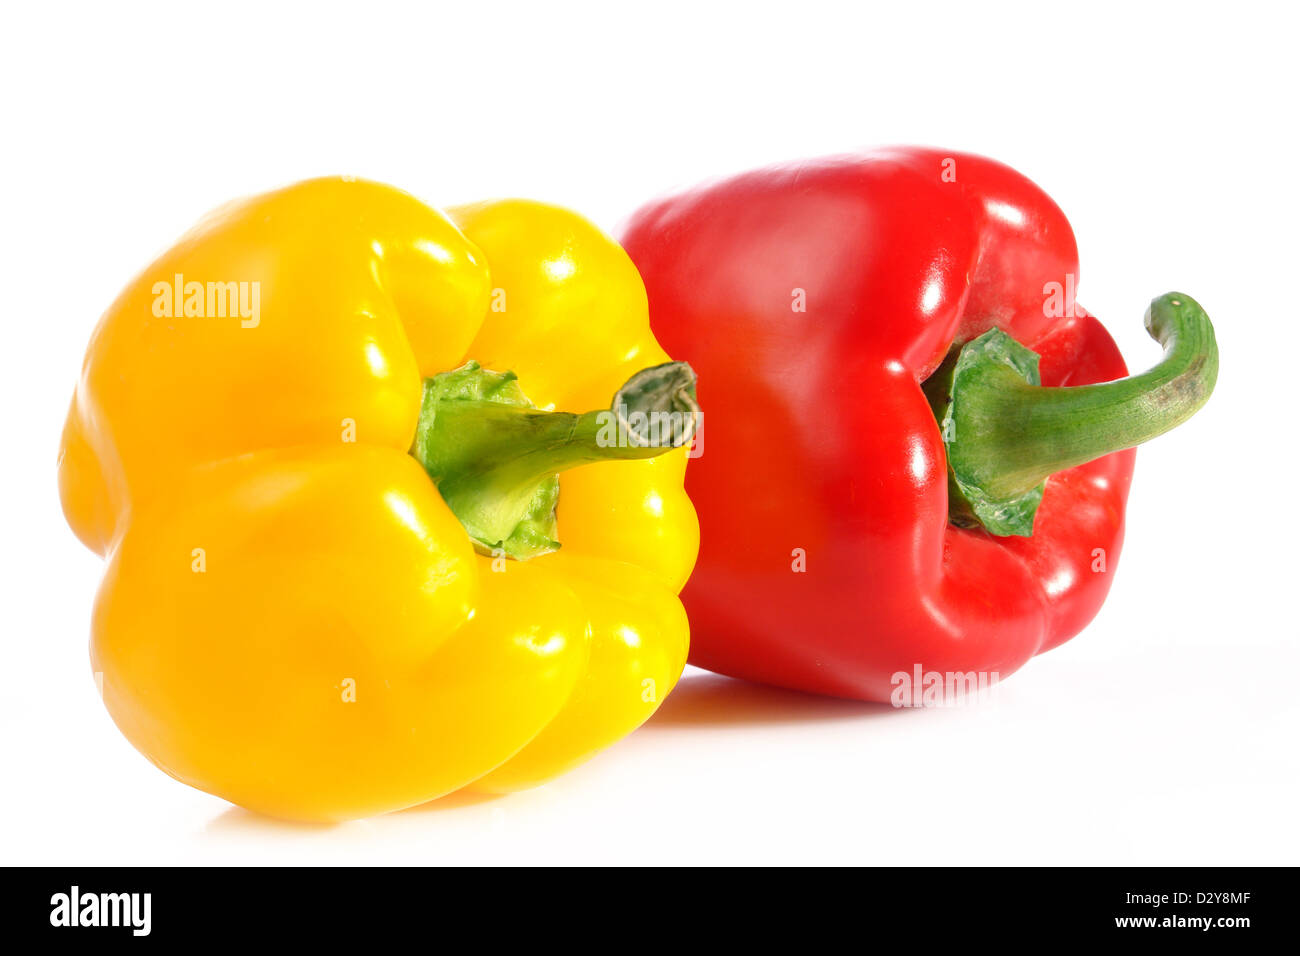 Two sweet peppers in yellow and red color over white Stock Photo